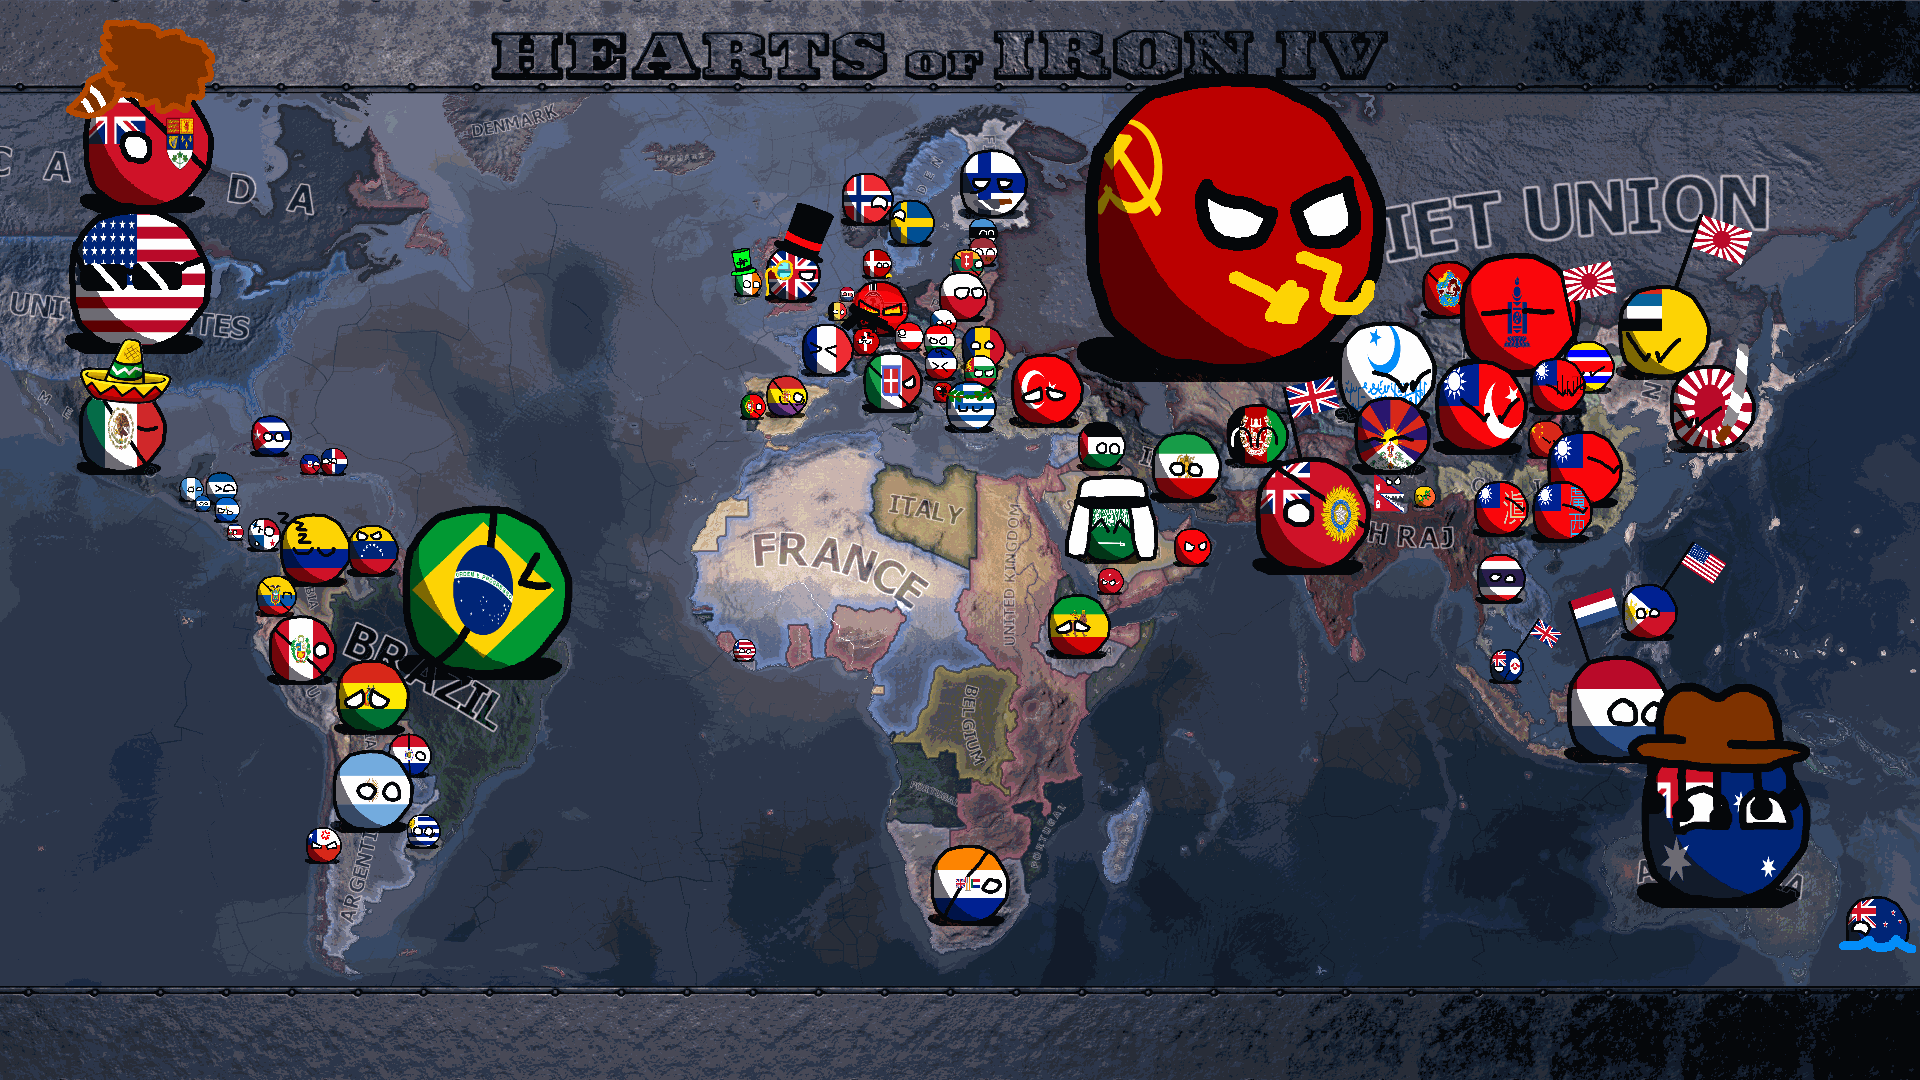 free download countryballs heroes free download